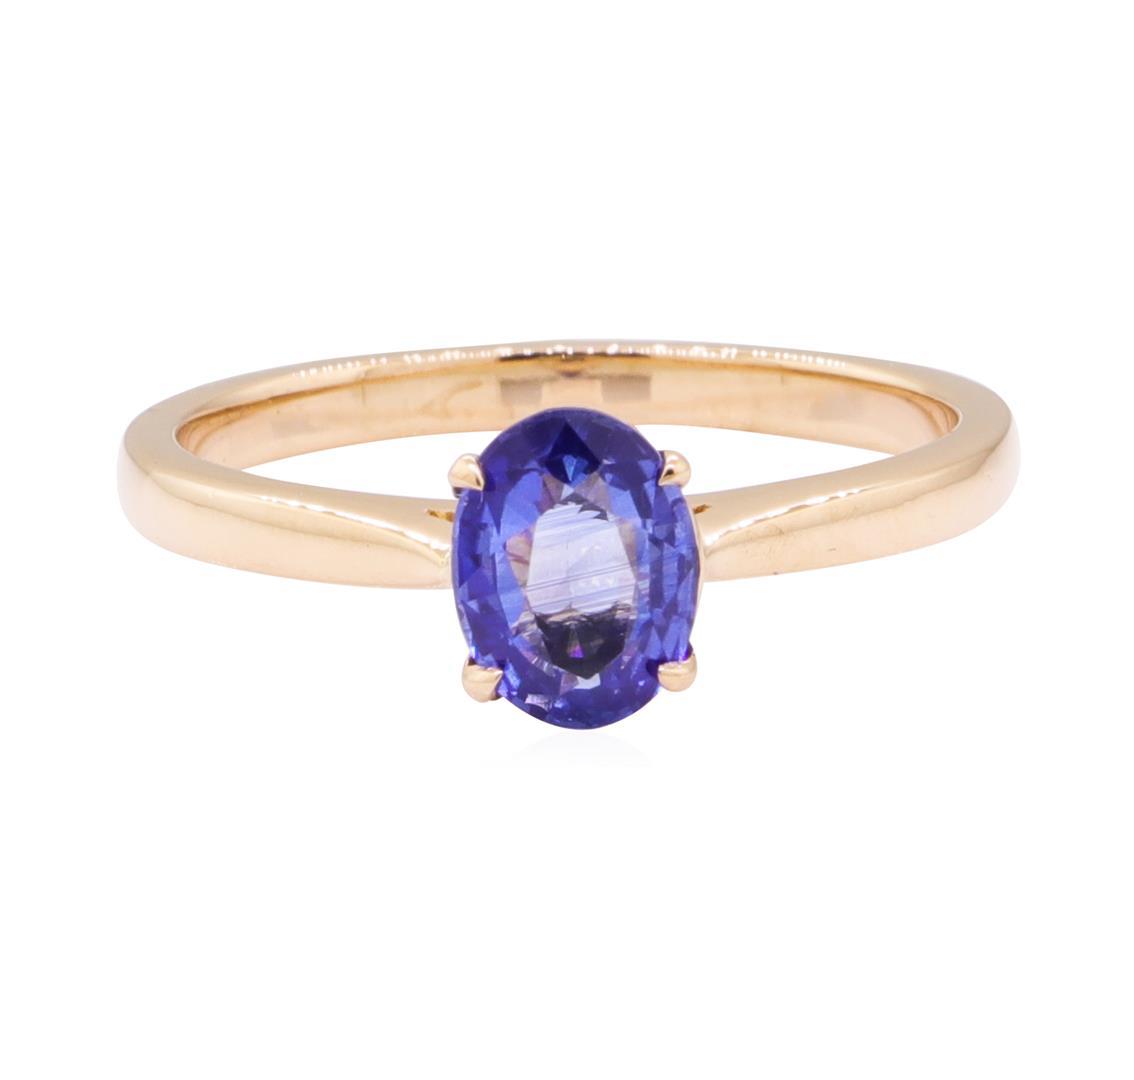 0.98 ctw Blue Sapphire Ring - 18KT Rose Gold